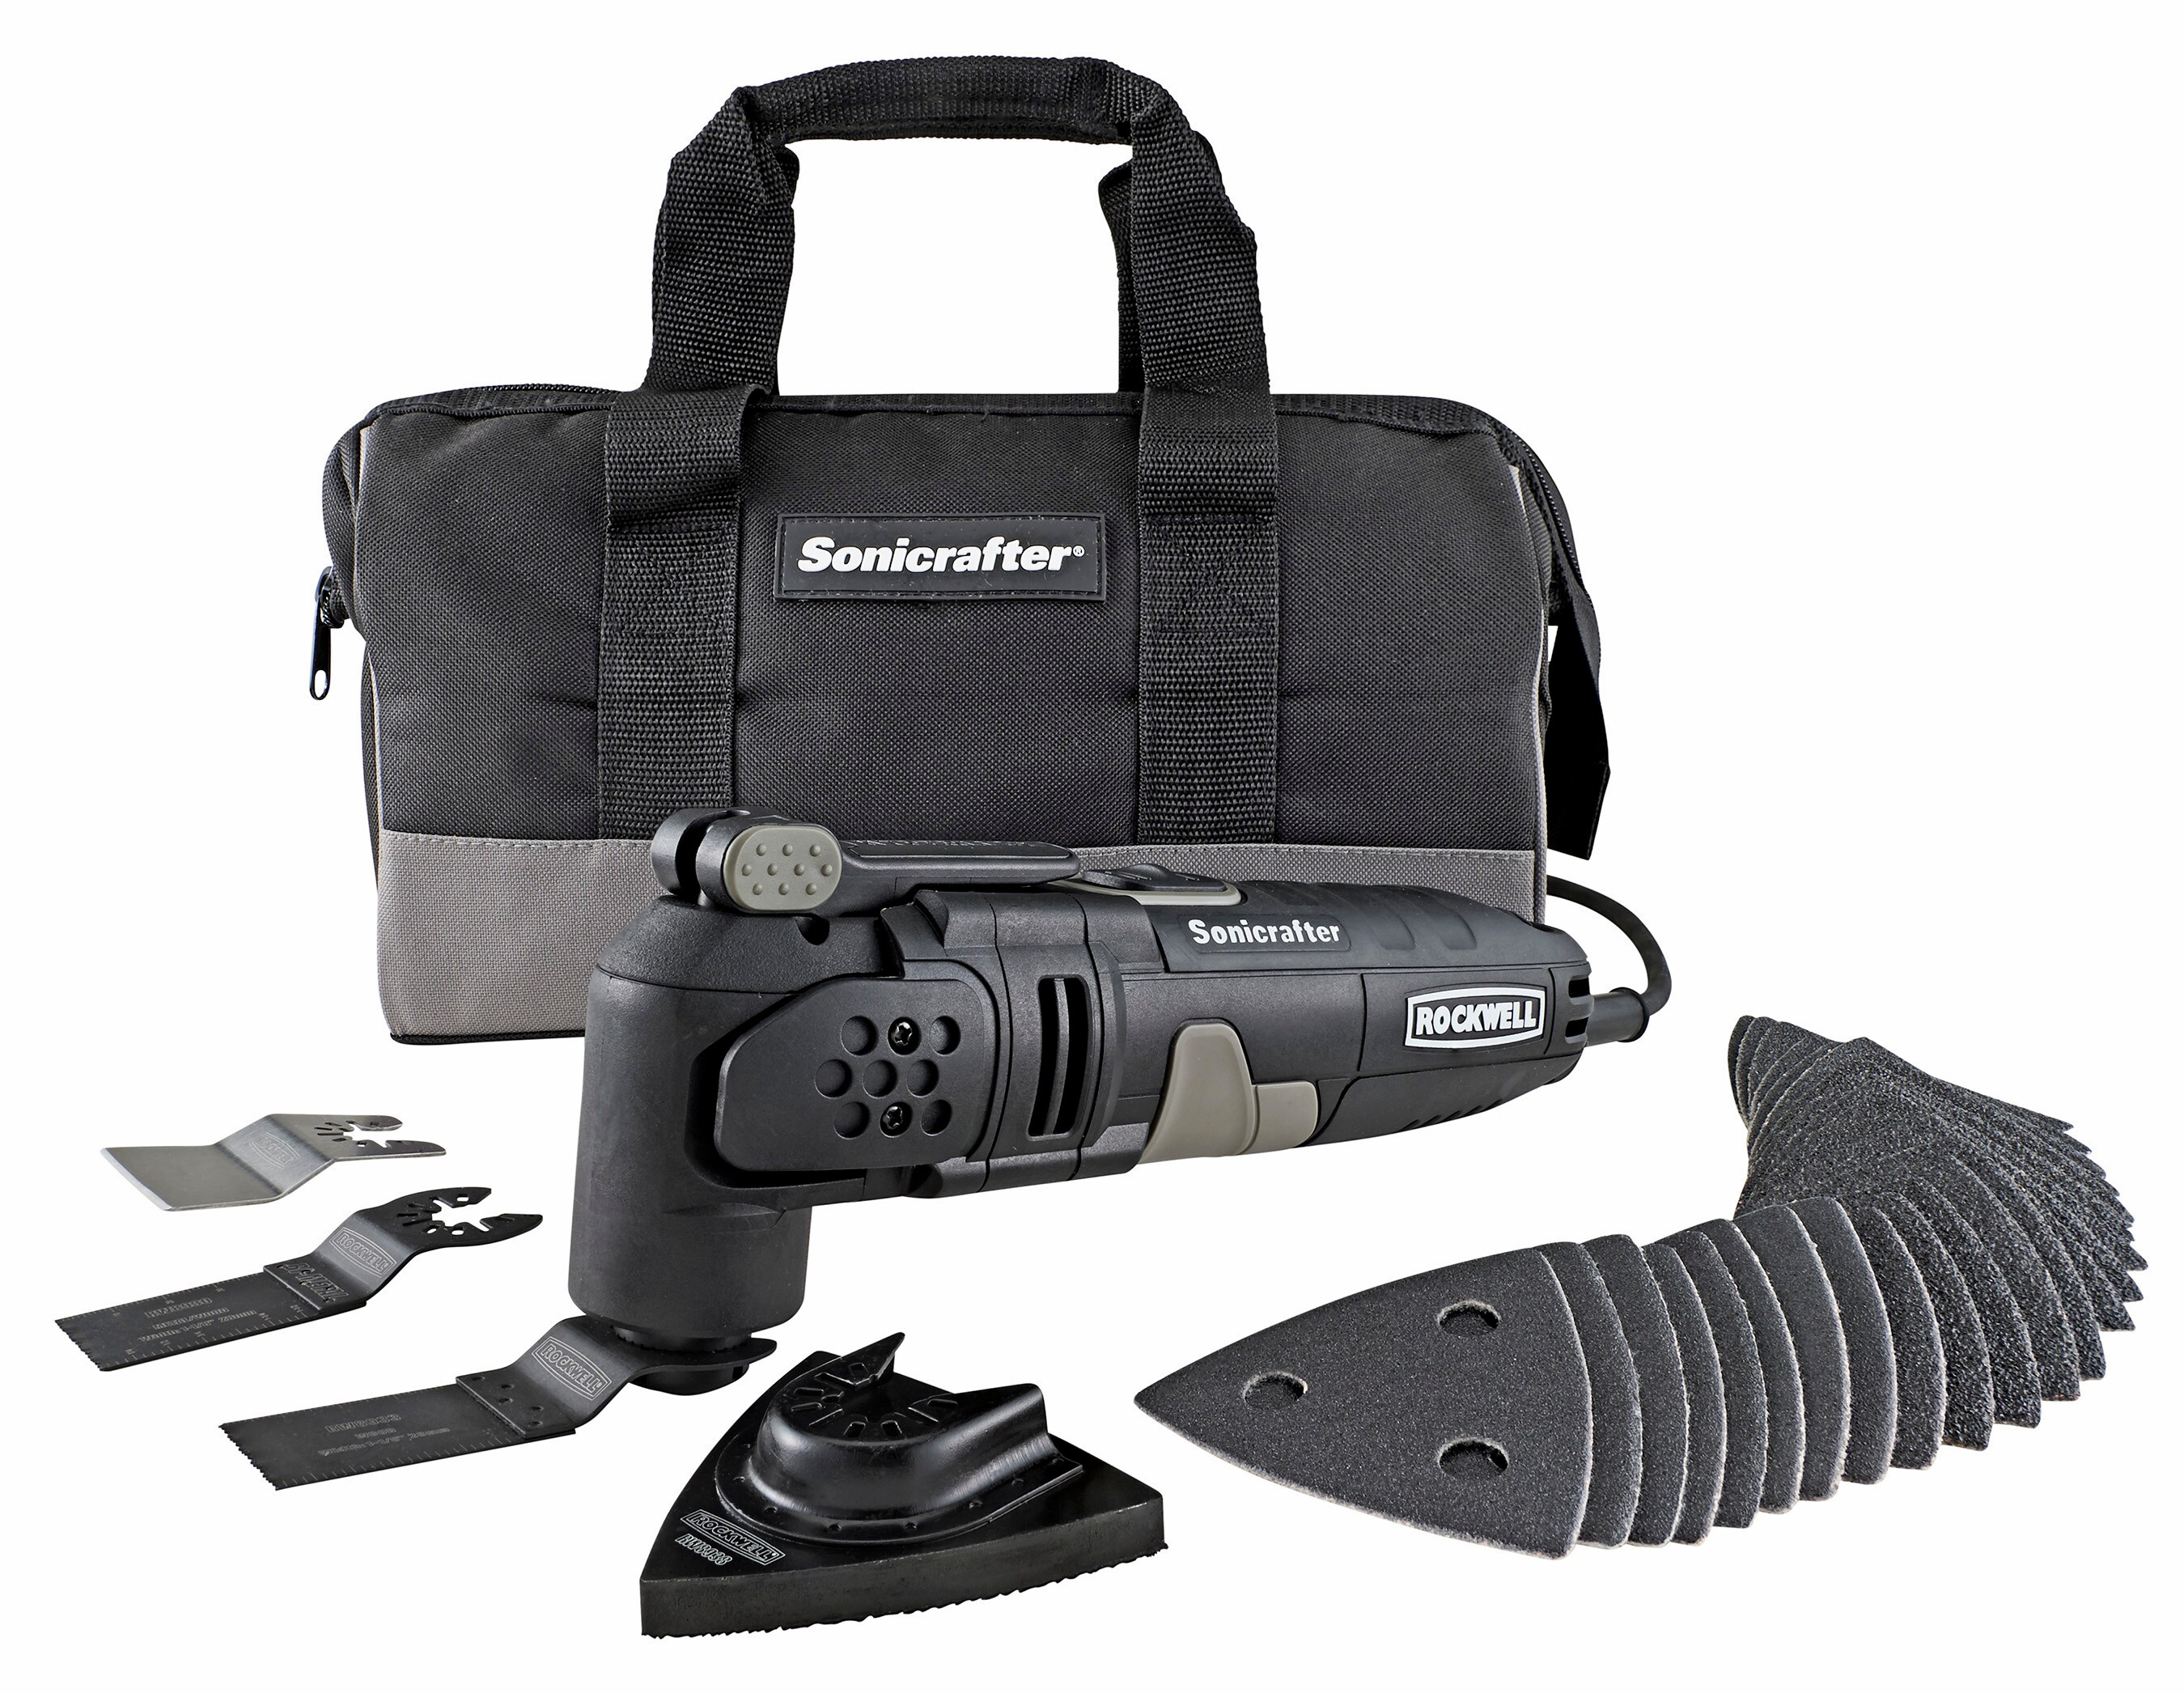 Rockwell 3.0 Amp Sonicrafter Oscillating Multi-Tool RK5121 Positec USA RK5121K and Universal Blade Fit System 31-Piece Kit with Bag Hyperlock Clamping with Variable Speed 